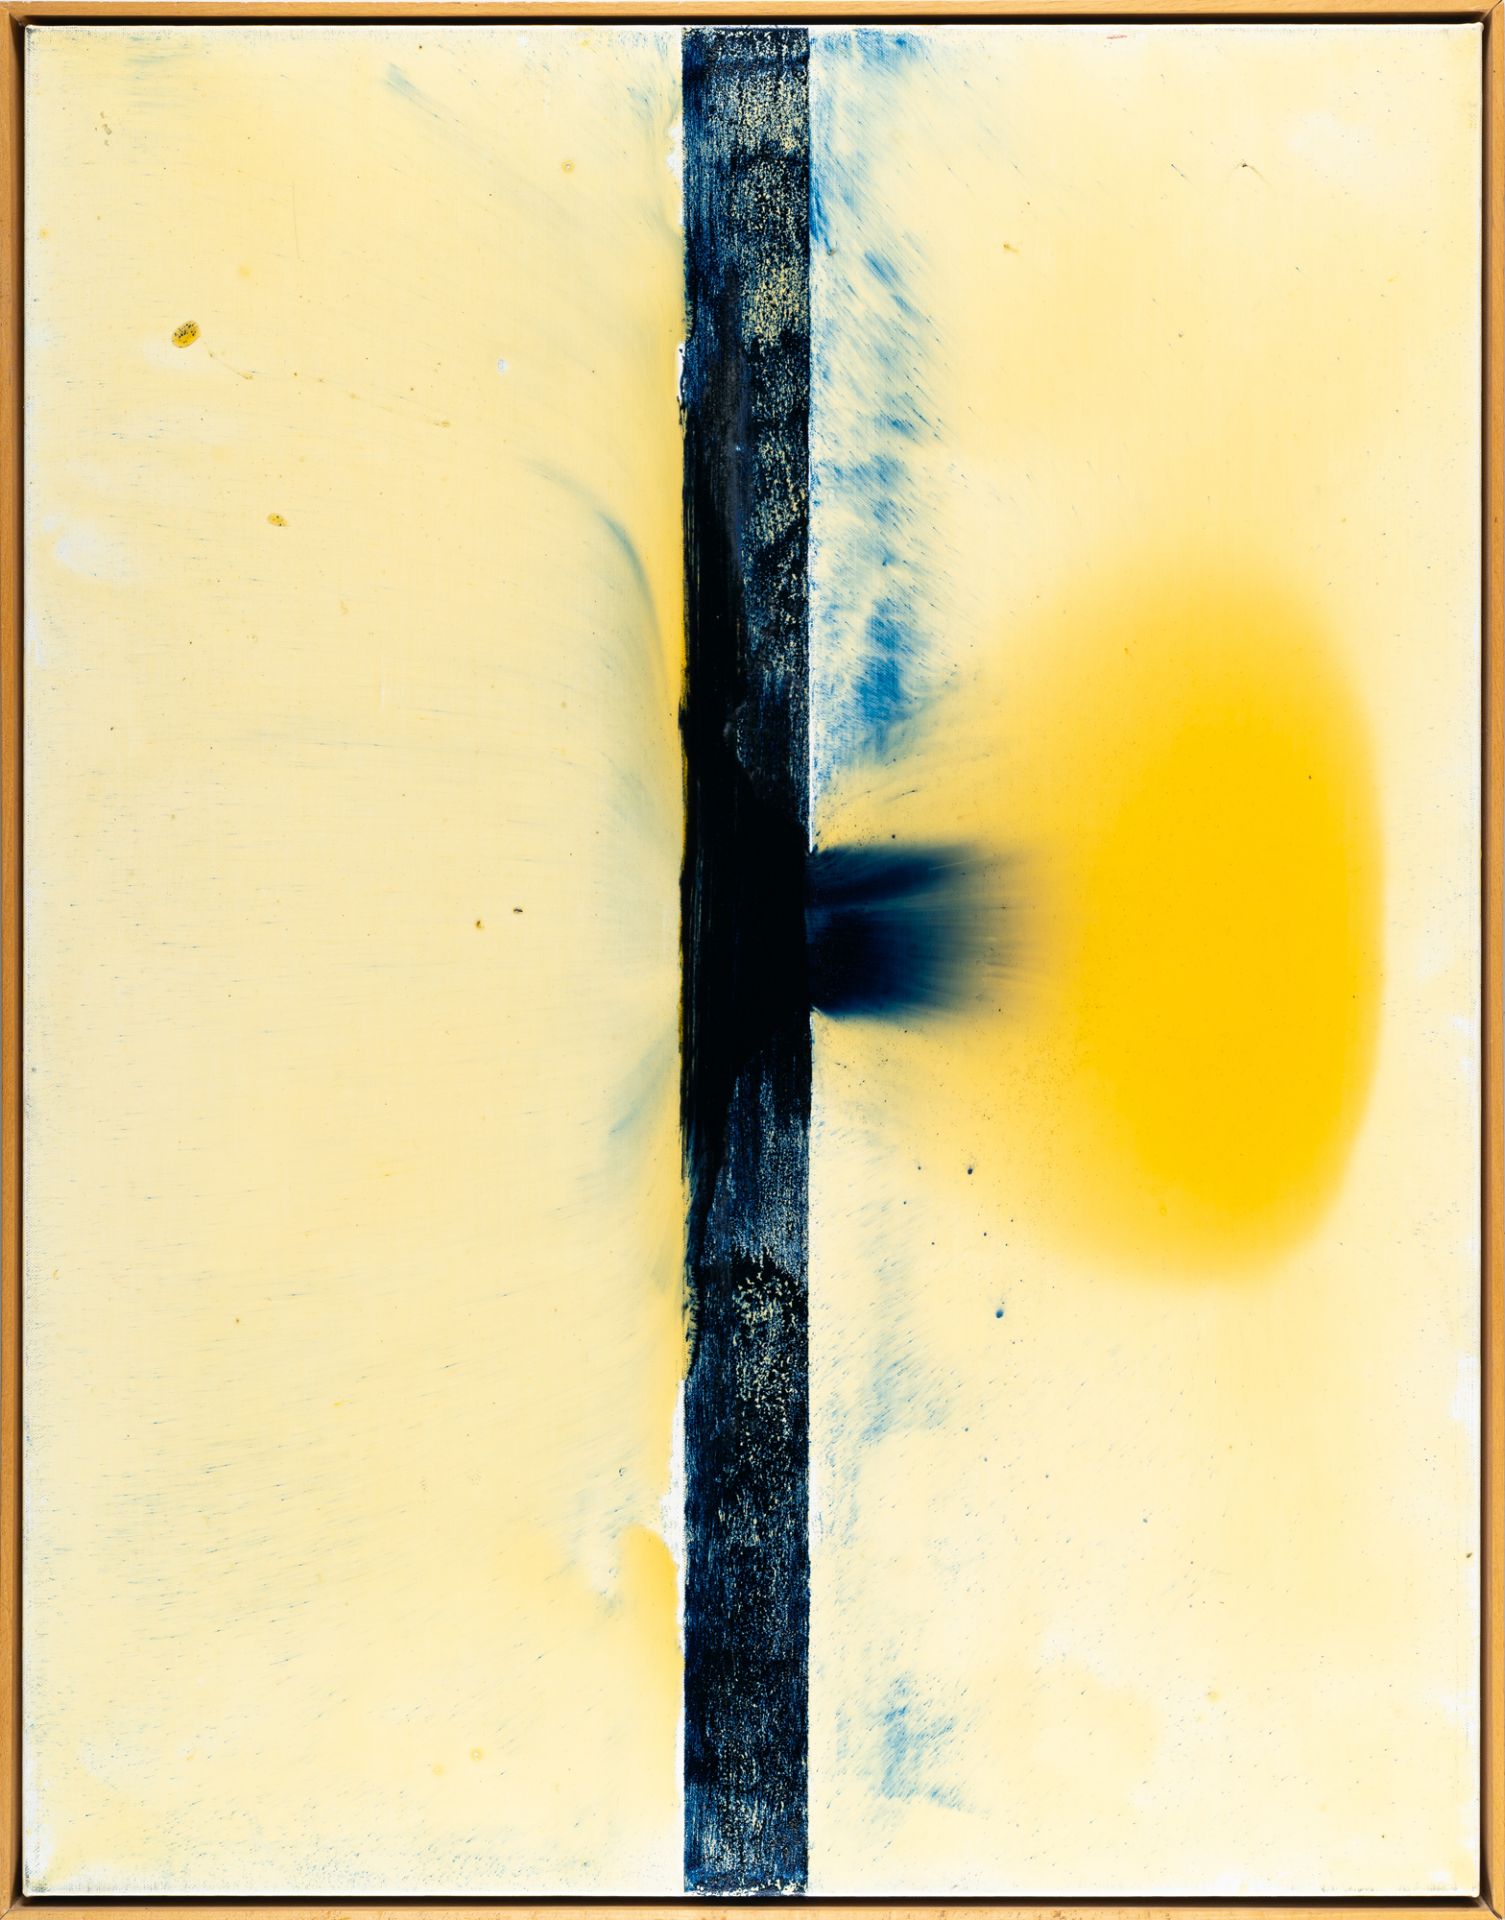 Günther Förg, Untitled.Pigmented lacquer on canvas on an aluminium stretcher. (19)97. Ca. 90 x 70. - Image 3 of 3